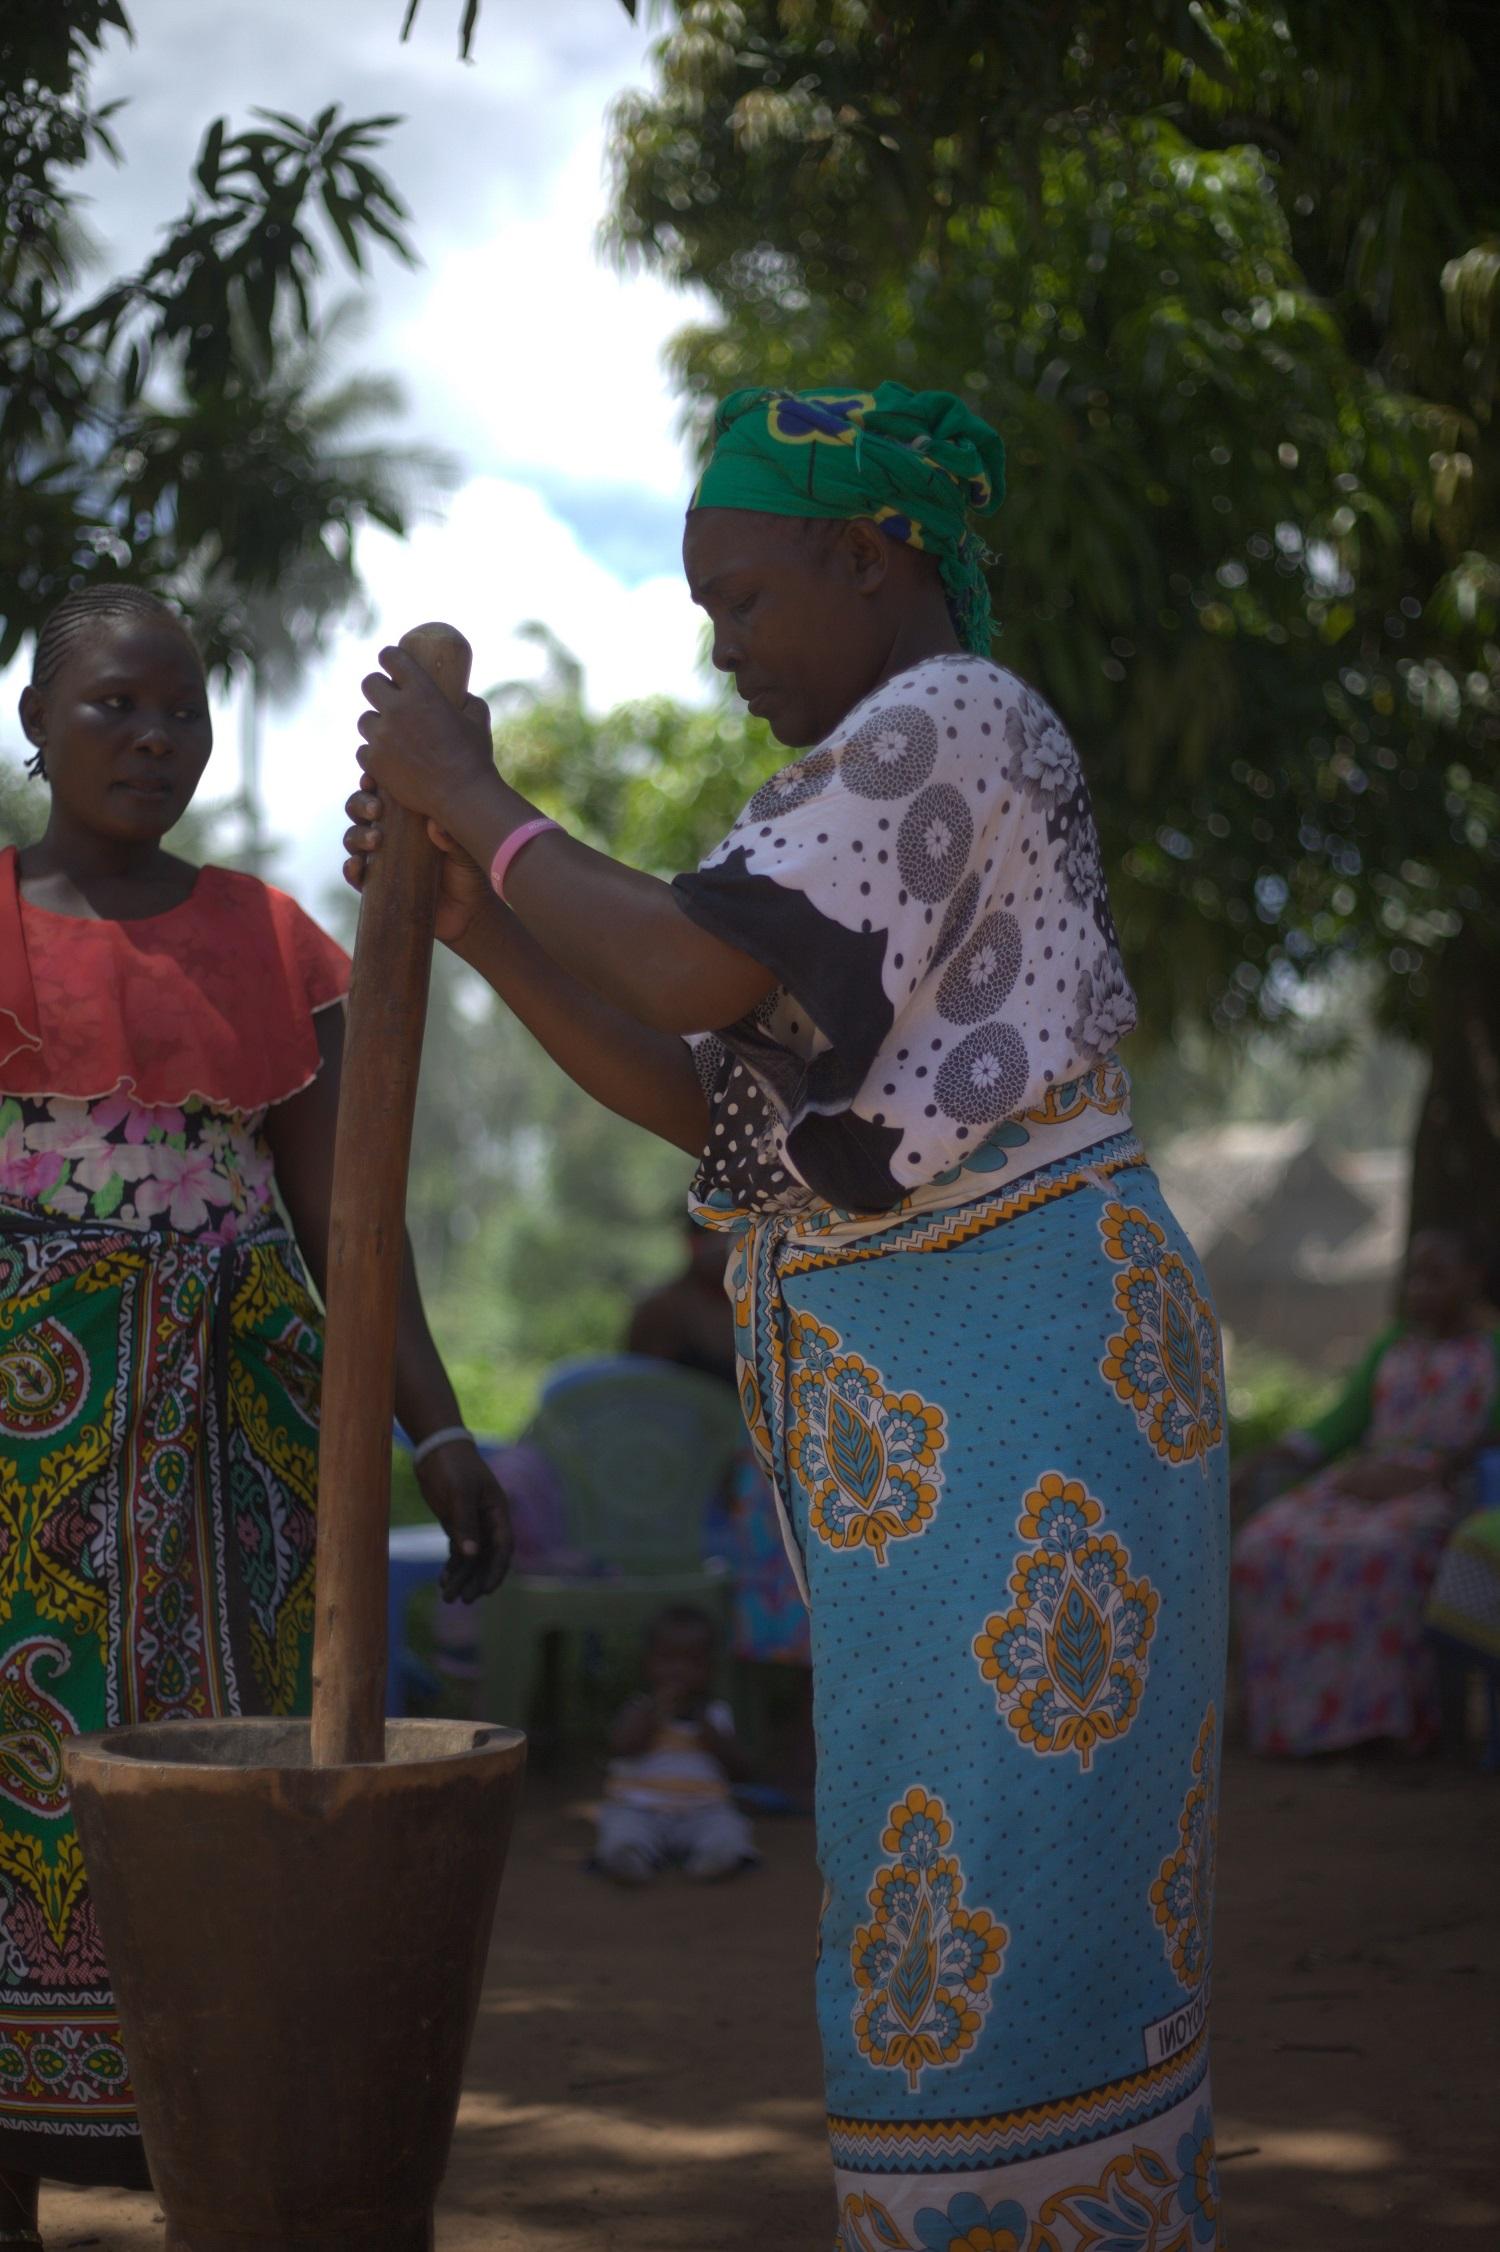 Women pounding the biochar. The women are trained to convert biomass to charcoal. www.theexchange.africa